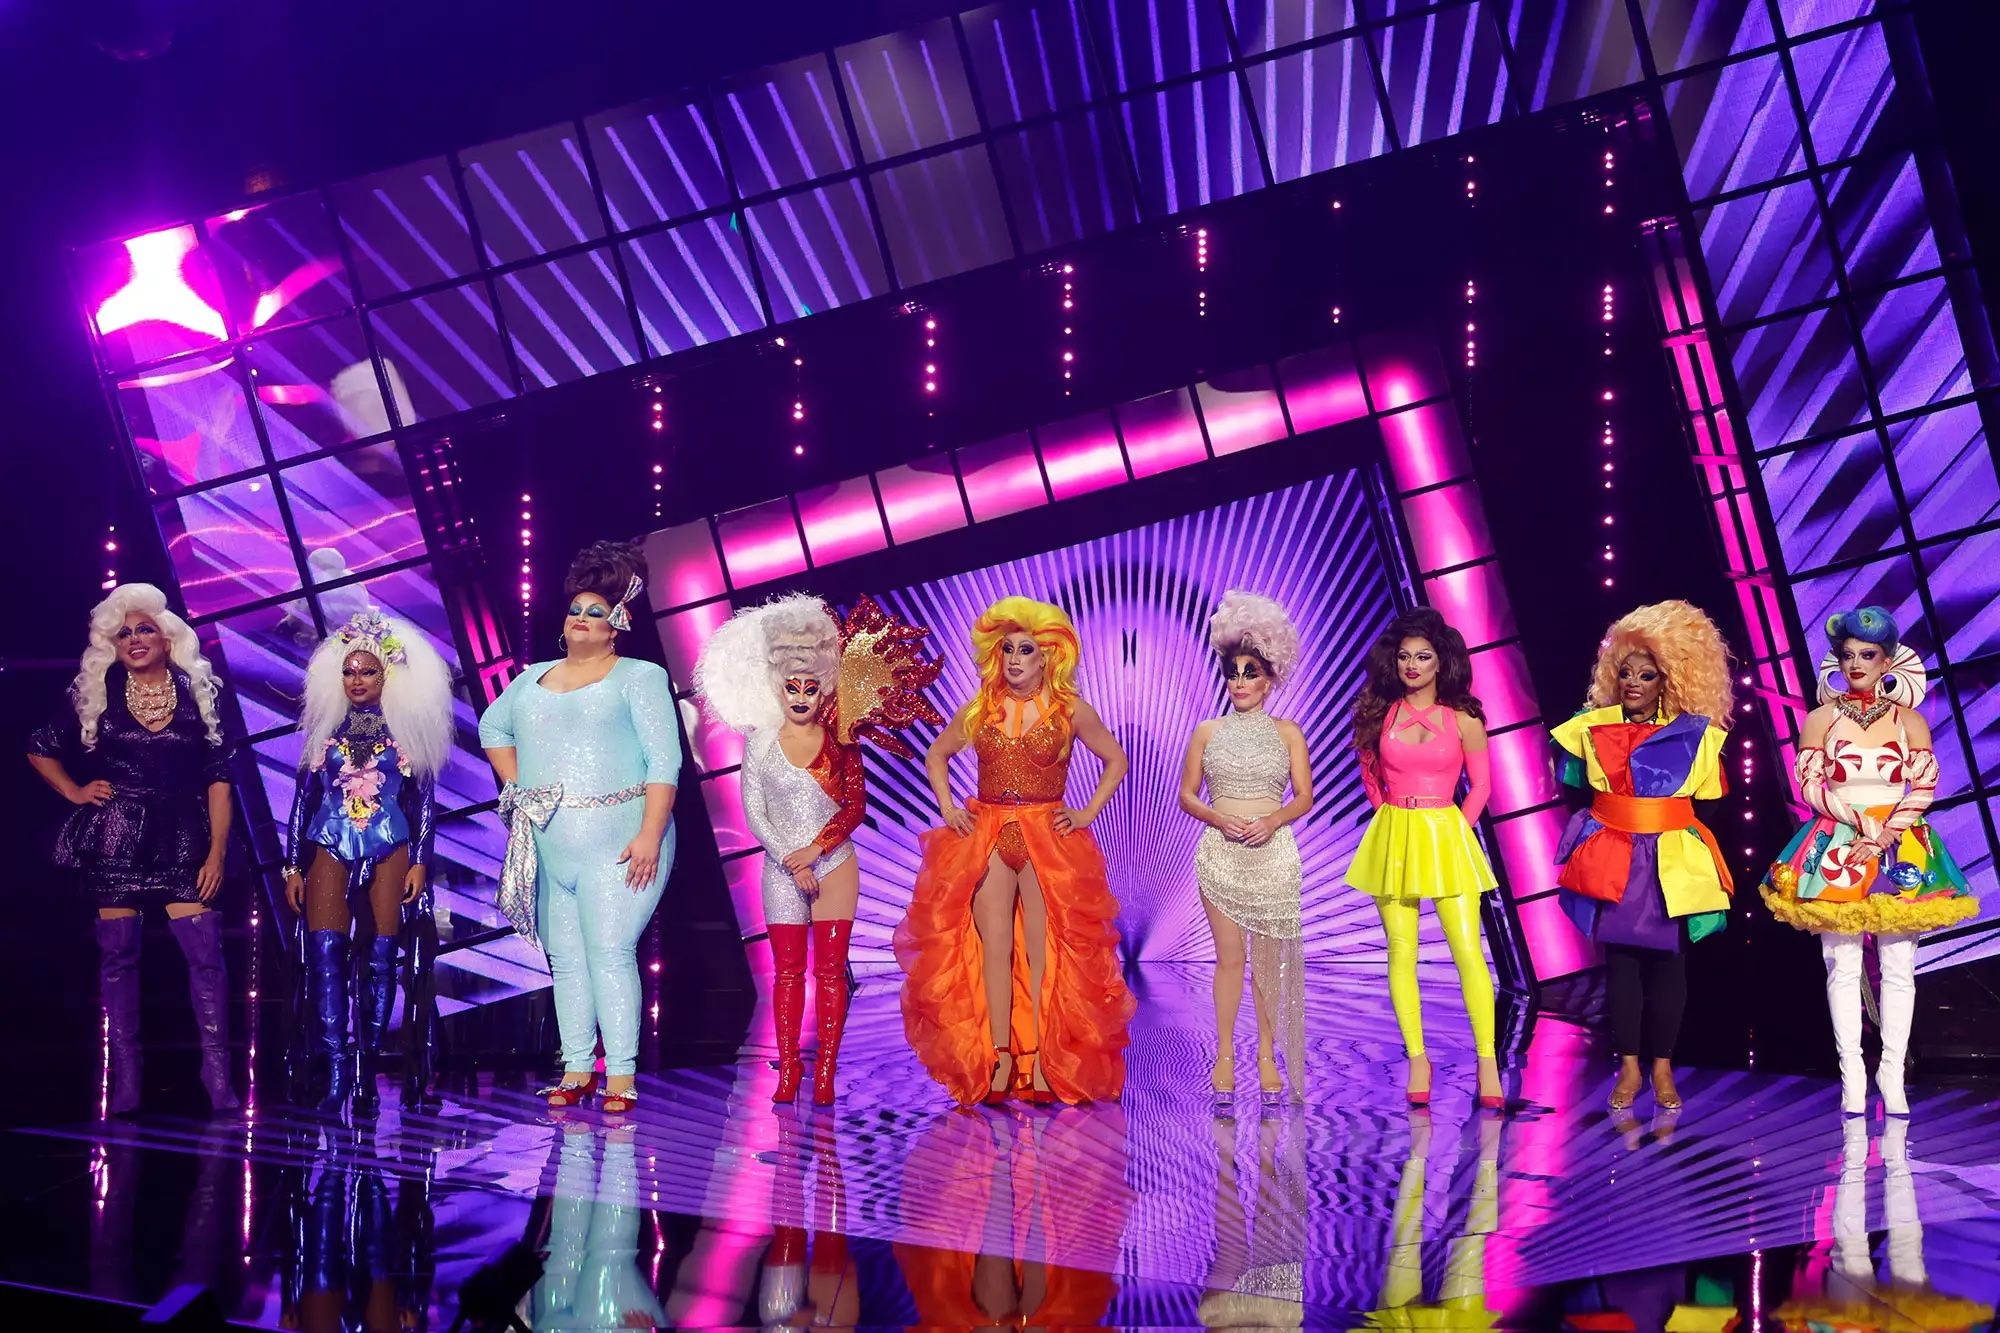 The full line up of eight celebrity drag queens competing on season 2 of RuPaul’s Secret Celebrity Drag Race.